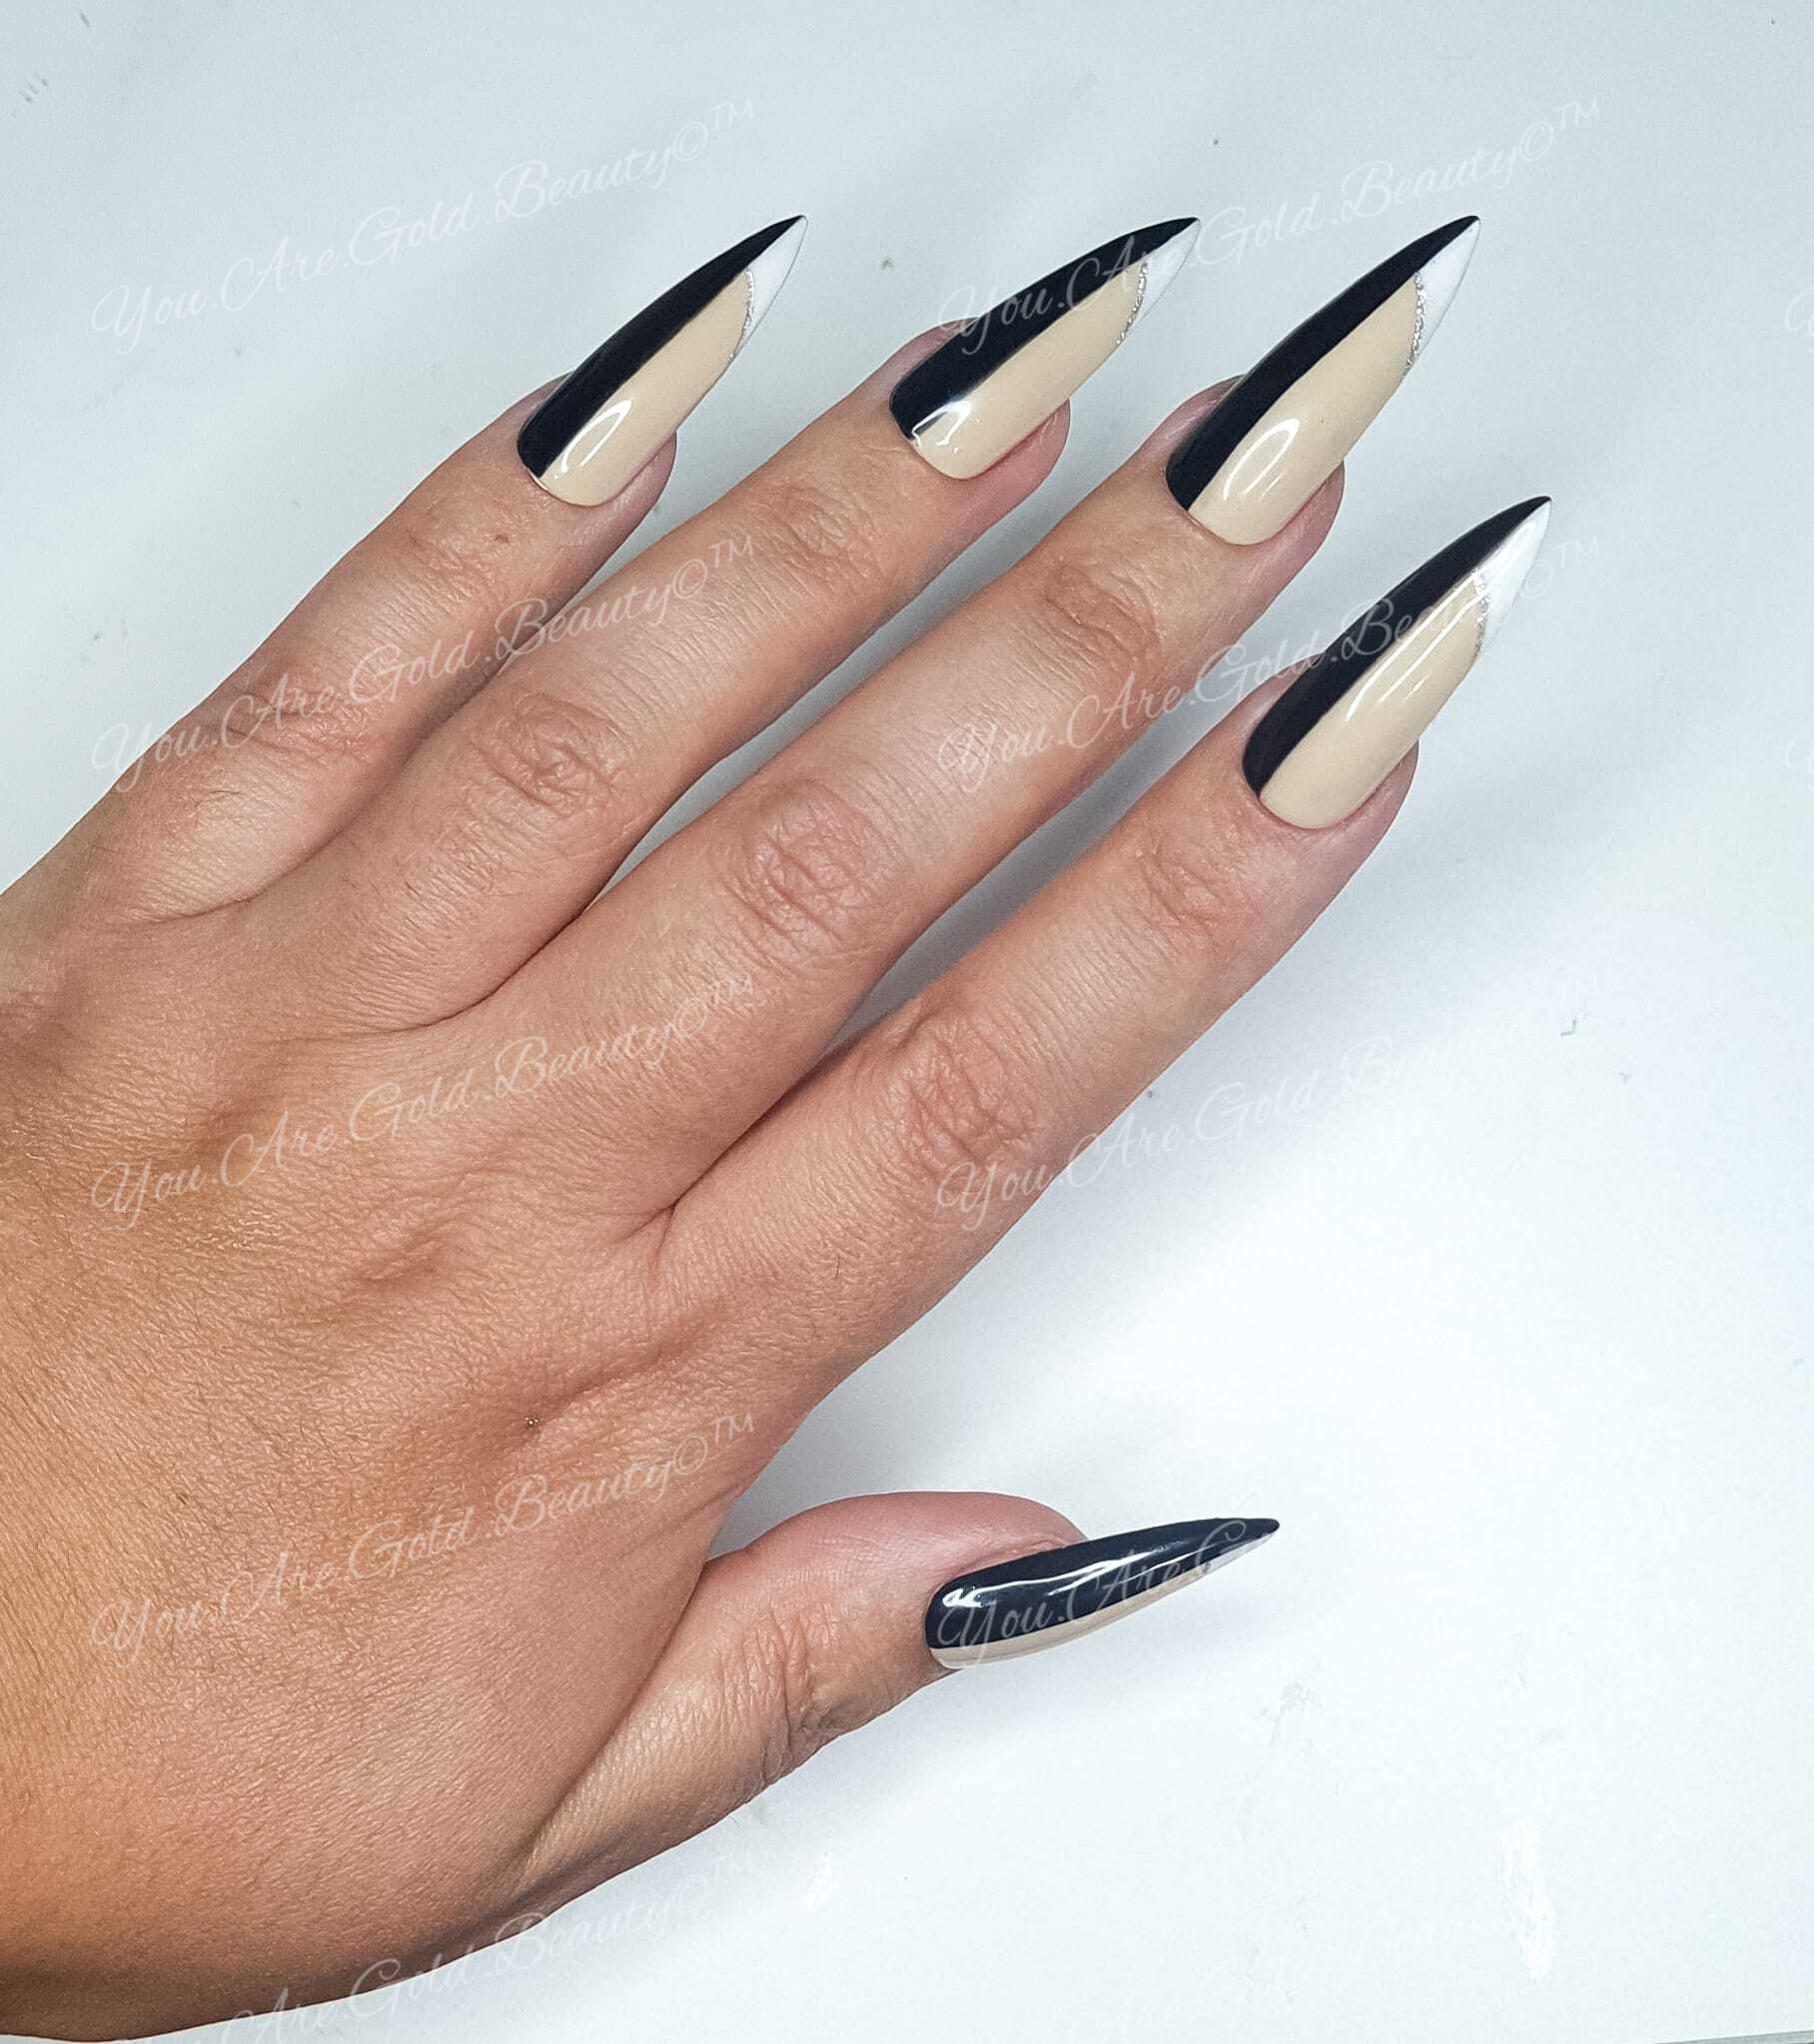 CoCo Press On Nails- Stiletto Shaped Black and white Classic half and half detail spring summer collection sexy classy full cover gel tip luxury false nails salon quality hand painted custom made uk COCO half white half black nail designs press on nails uk stiletto shaped nails black and white nails